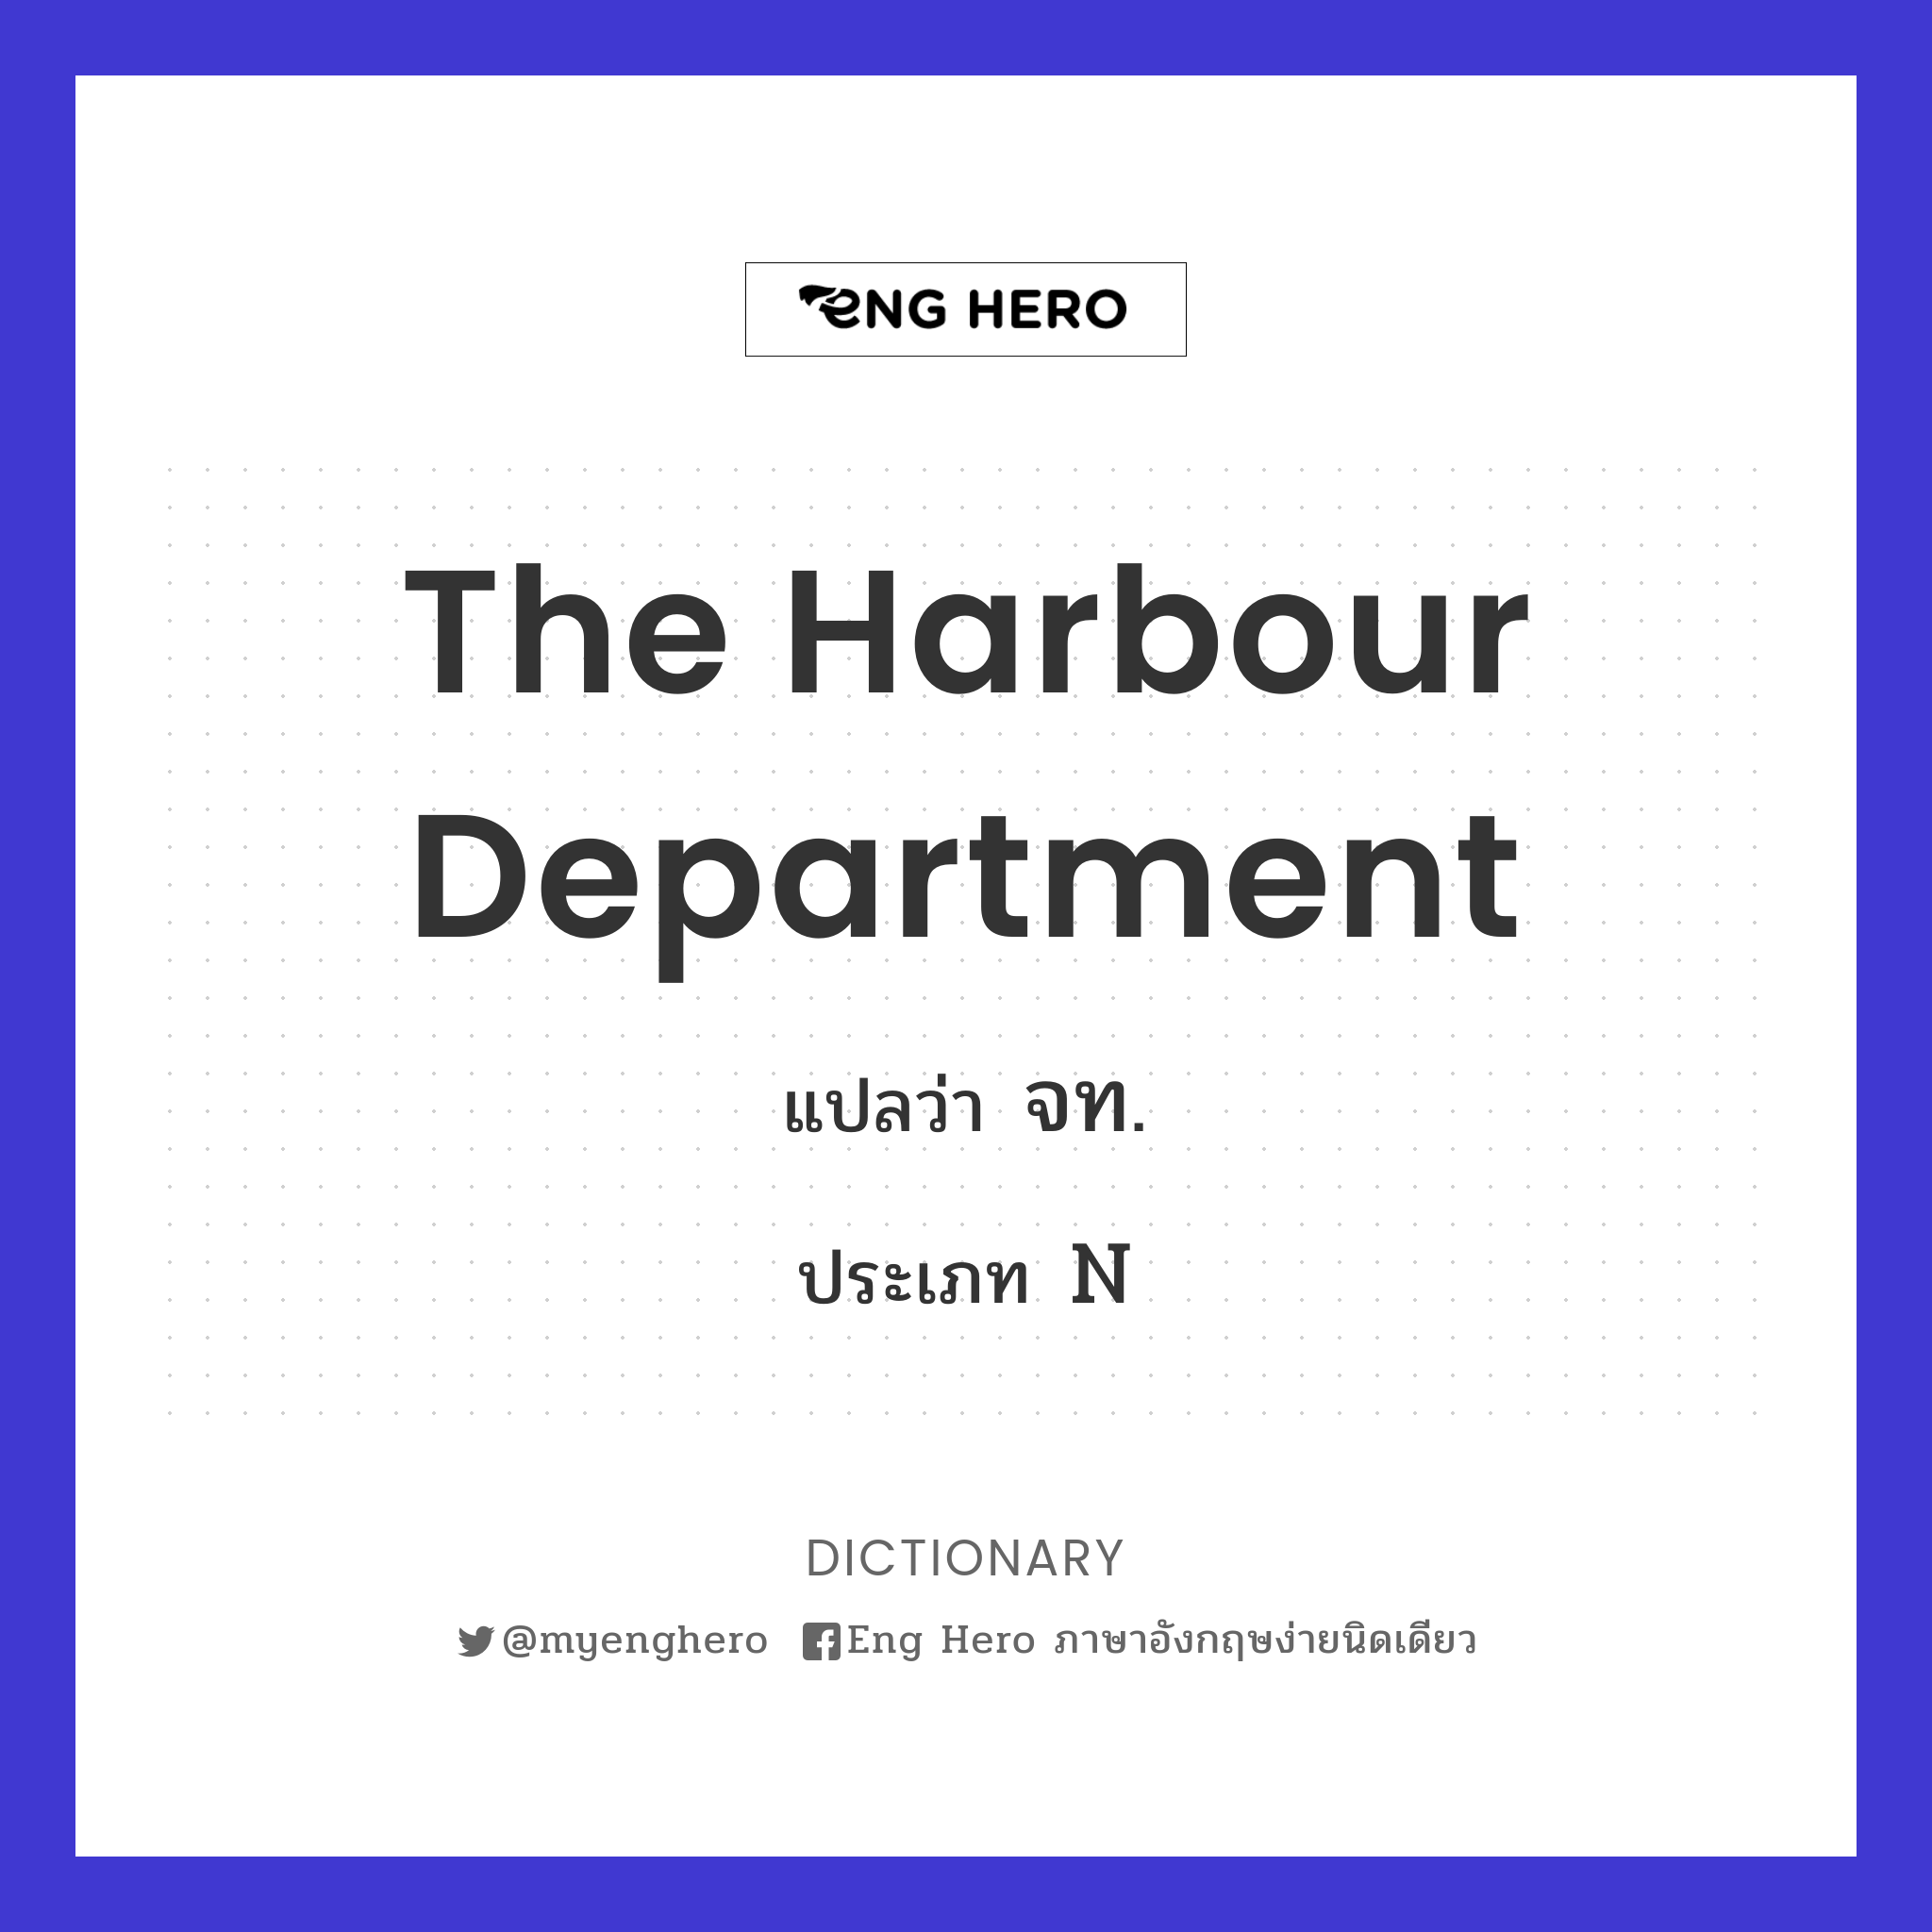 The Harbour Department